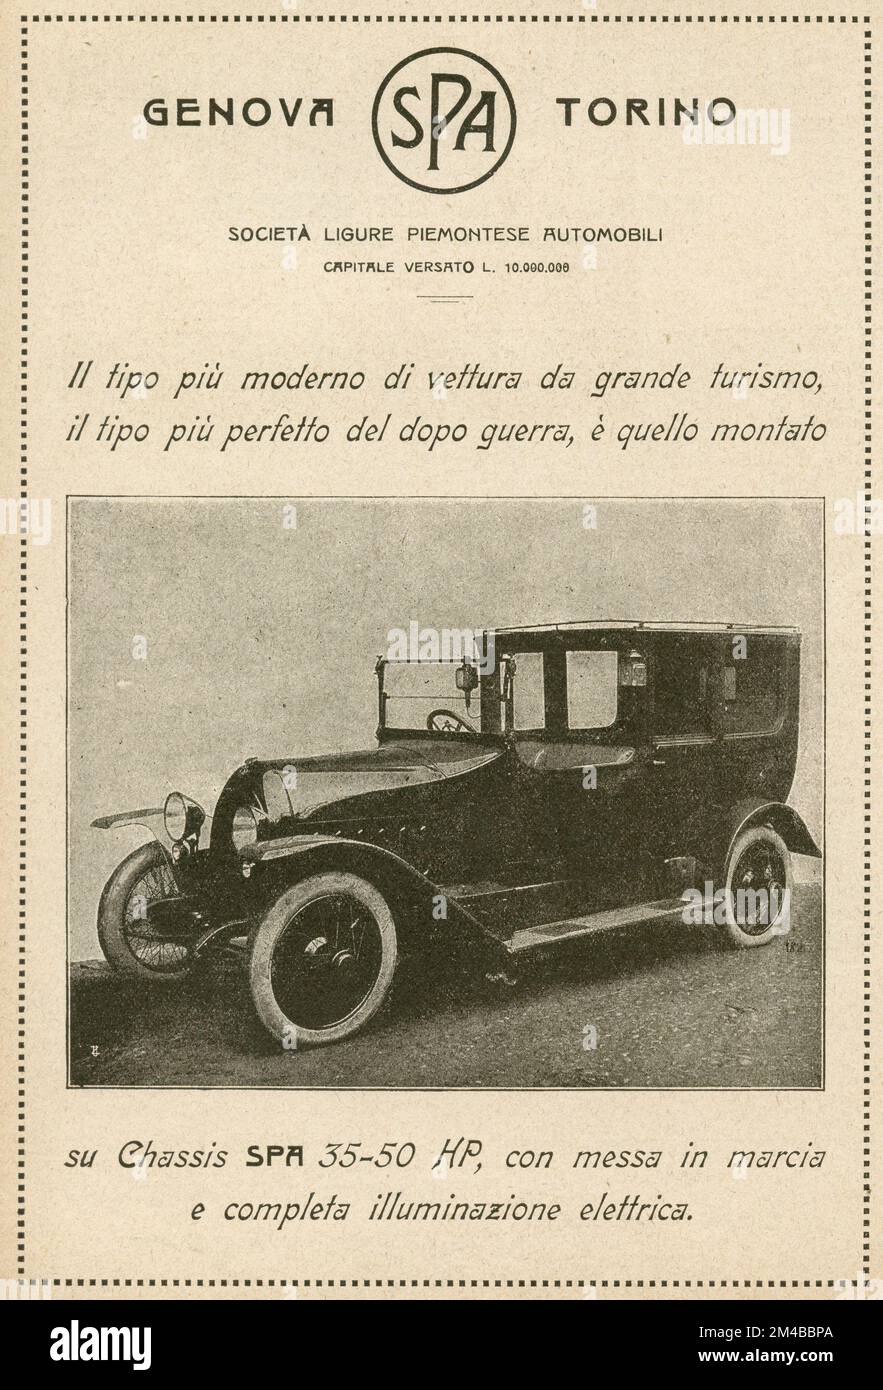 Vintage newspaper ad of SPA car, Italy 1930s Stock Photo